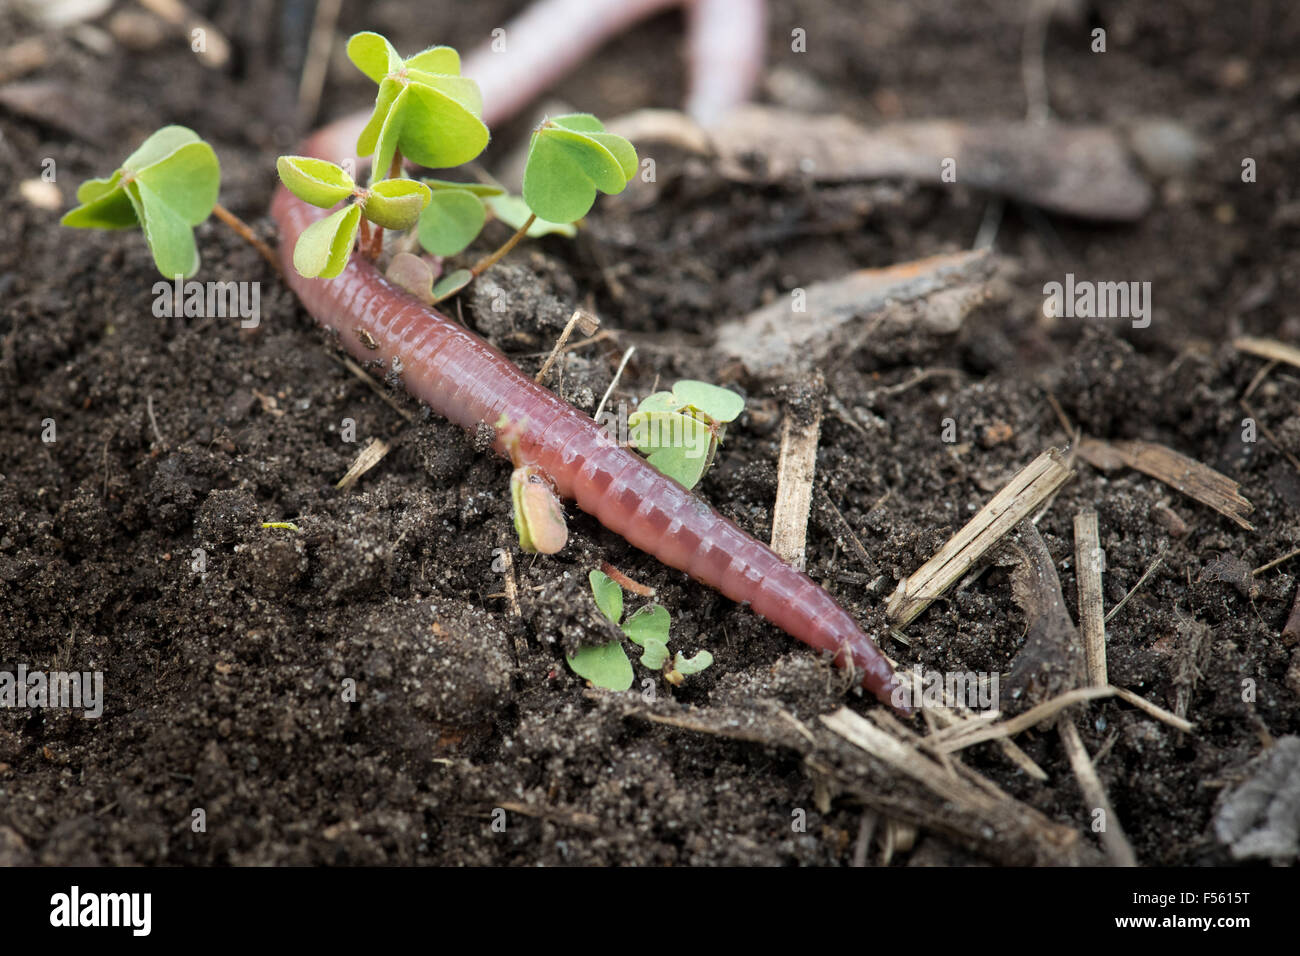 02.05.2015, Berlin, Berlin, Germany  - The earthworms (Lumbricidae) are living in the soil, articulated worms from the order of the oligochaeta (Oligochaeta). 00Y150502D003CAROEX.JPG - NOT for SALE in G E R M A N Y, A U S T R I A, S W I T Z E R L A N D [MODEL RELEASE: NOT APPLICABLE, PROPERTY RELEASE: NO (c) caro photo agency / Teich, http://www.caro-images.pl, info@carofoto.pl - In case of using the picture for non-journalistic purposes, please contact the agency - the picture is subject to royalty!] Stock Photo